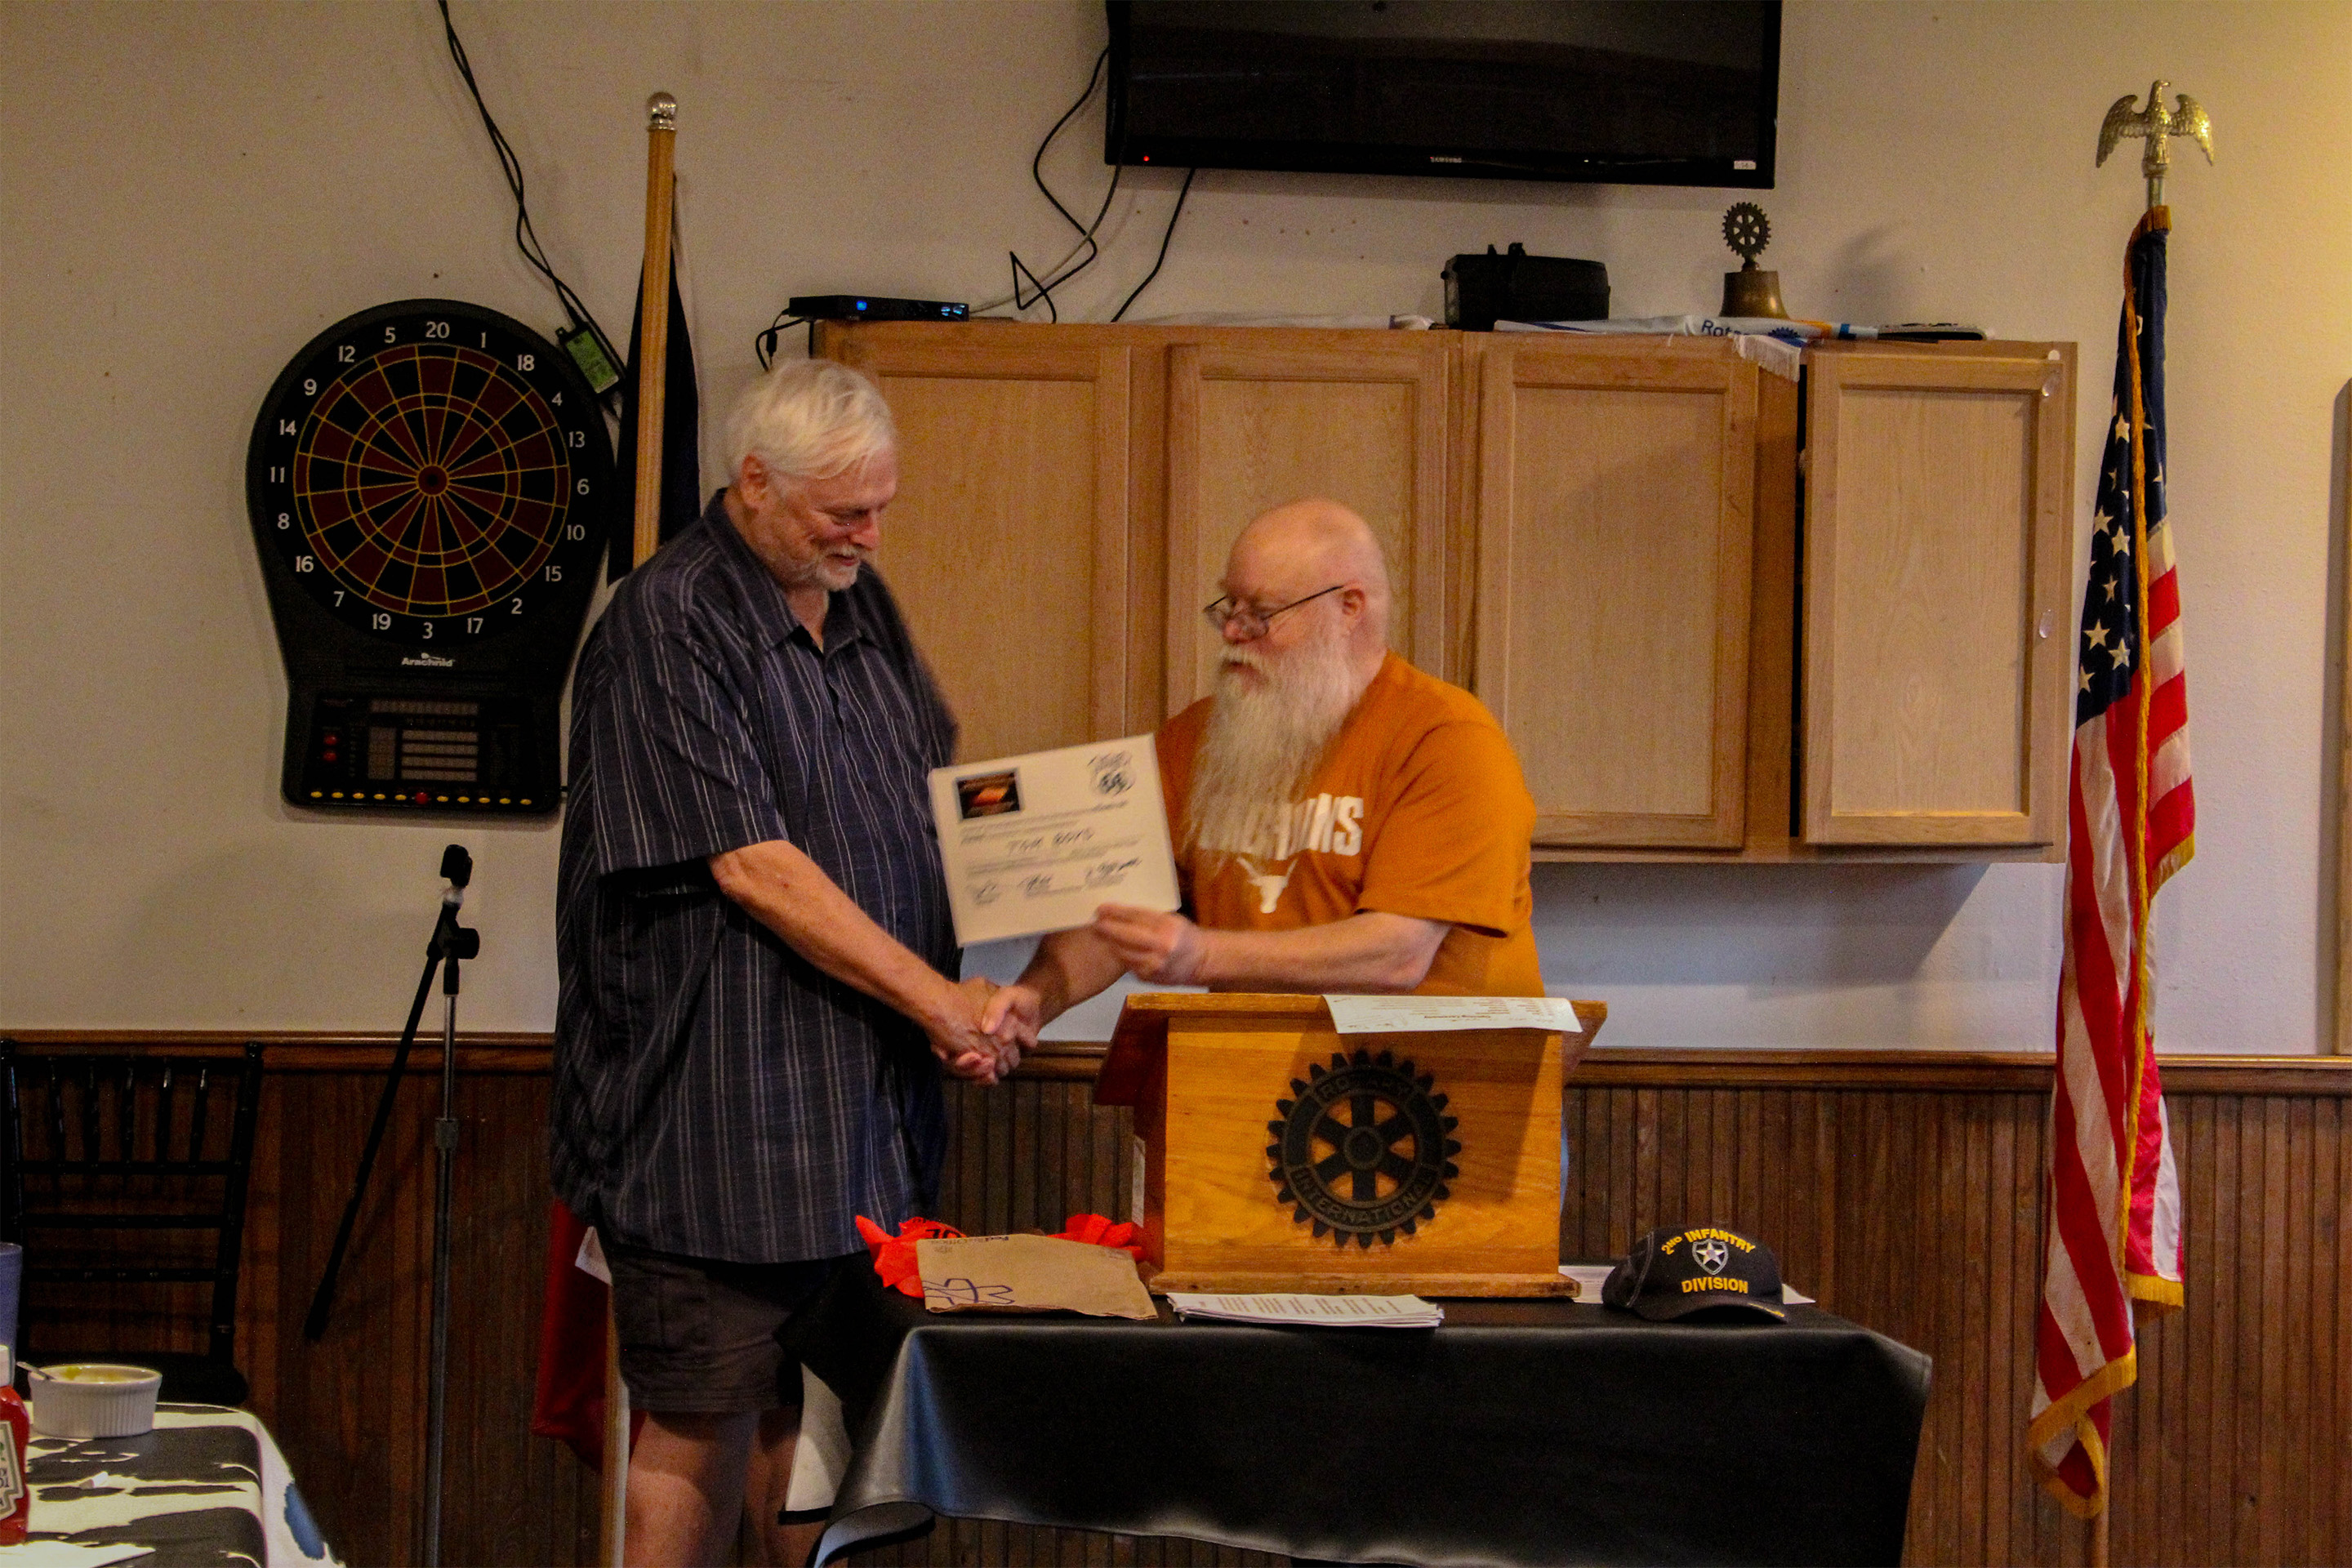 Tom Boyd traveled 1,792 miles to play in the 2019 Texas Armed Forces and Military Veterans Open Chess Championships (left in the photo).  Chief Organizer Jim Hollingsworth (right) presented his award at the Veterans Dinner.  Photo by Sheryl McBroom.